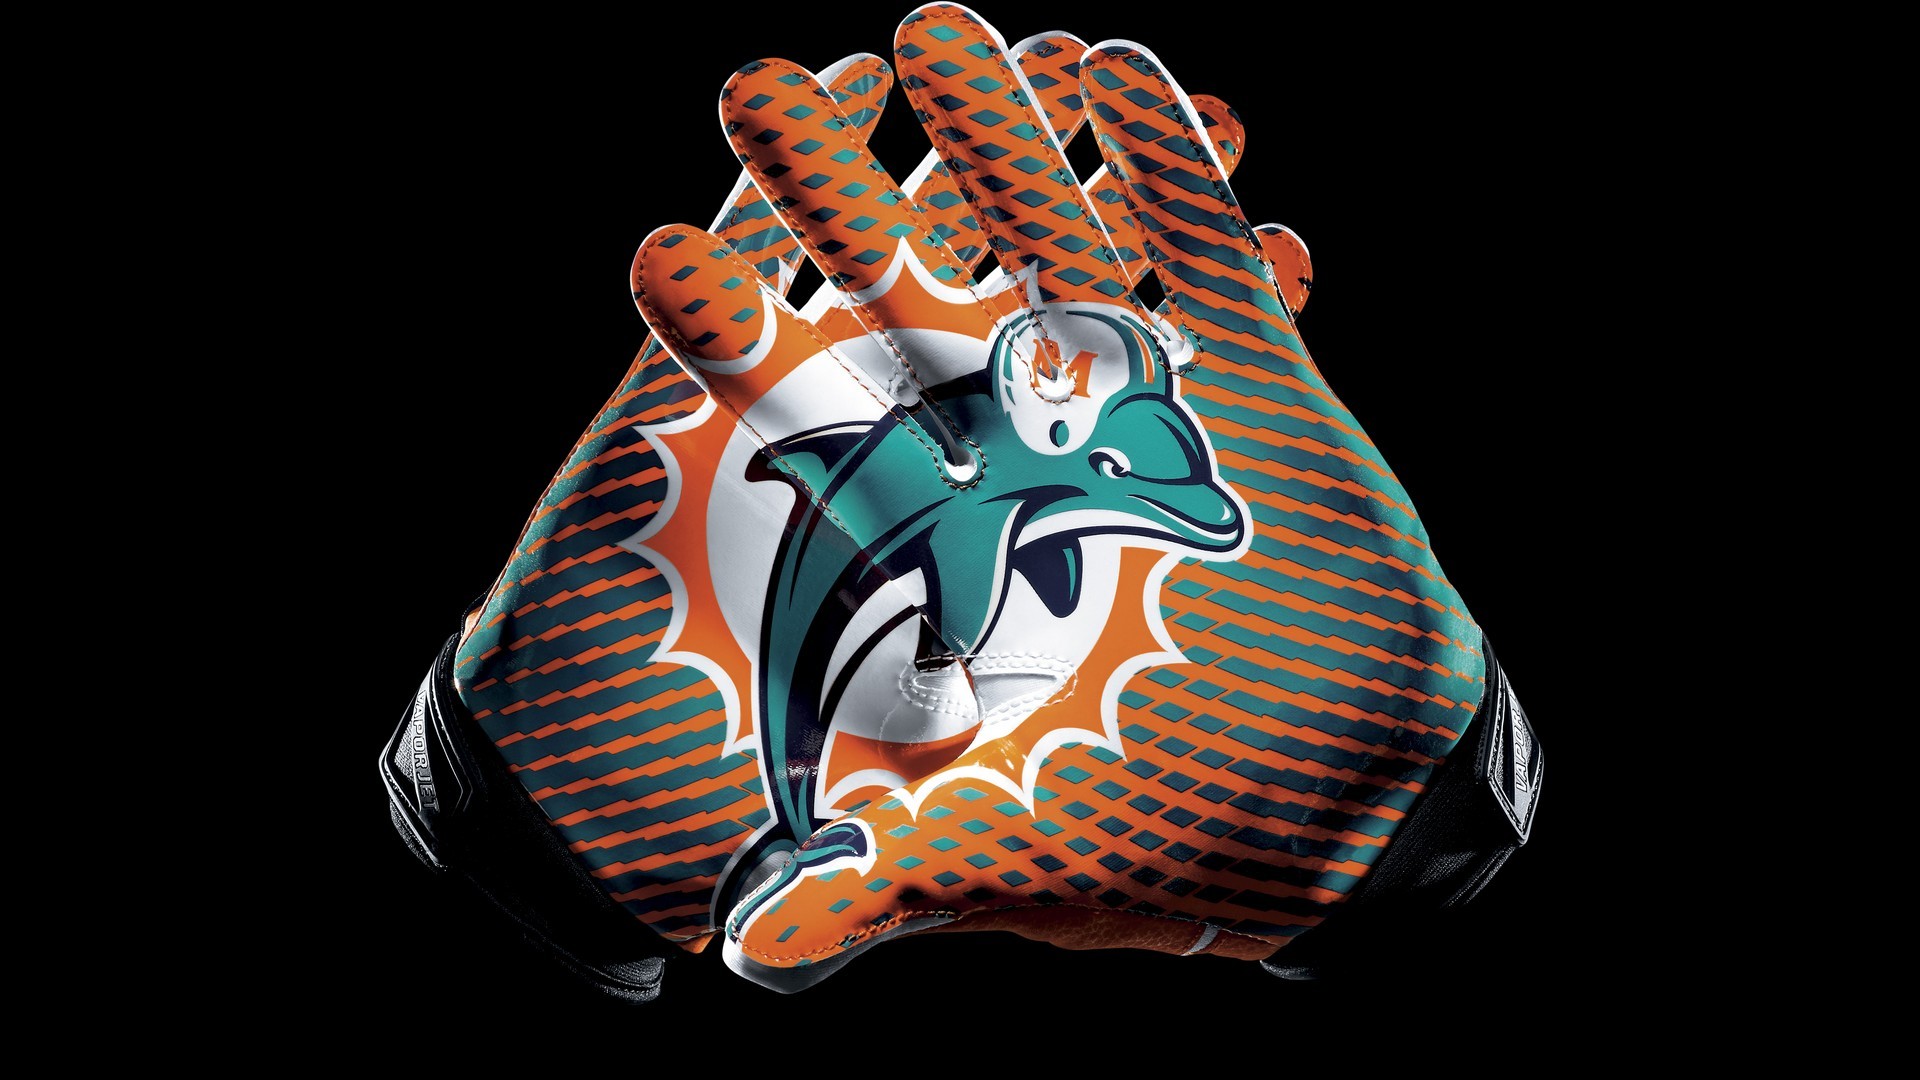 1920x1080 Wallpapers Miami Dolphins with resolution  pixel. You can make  this wallpaper for your Mac